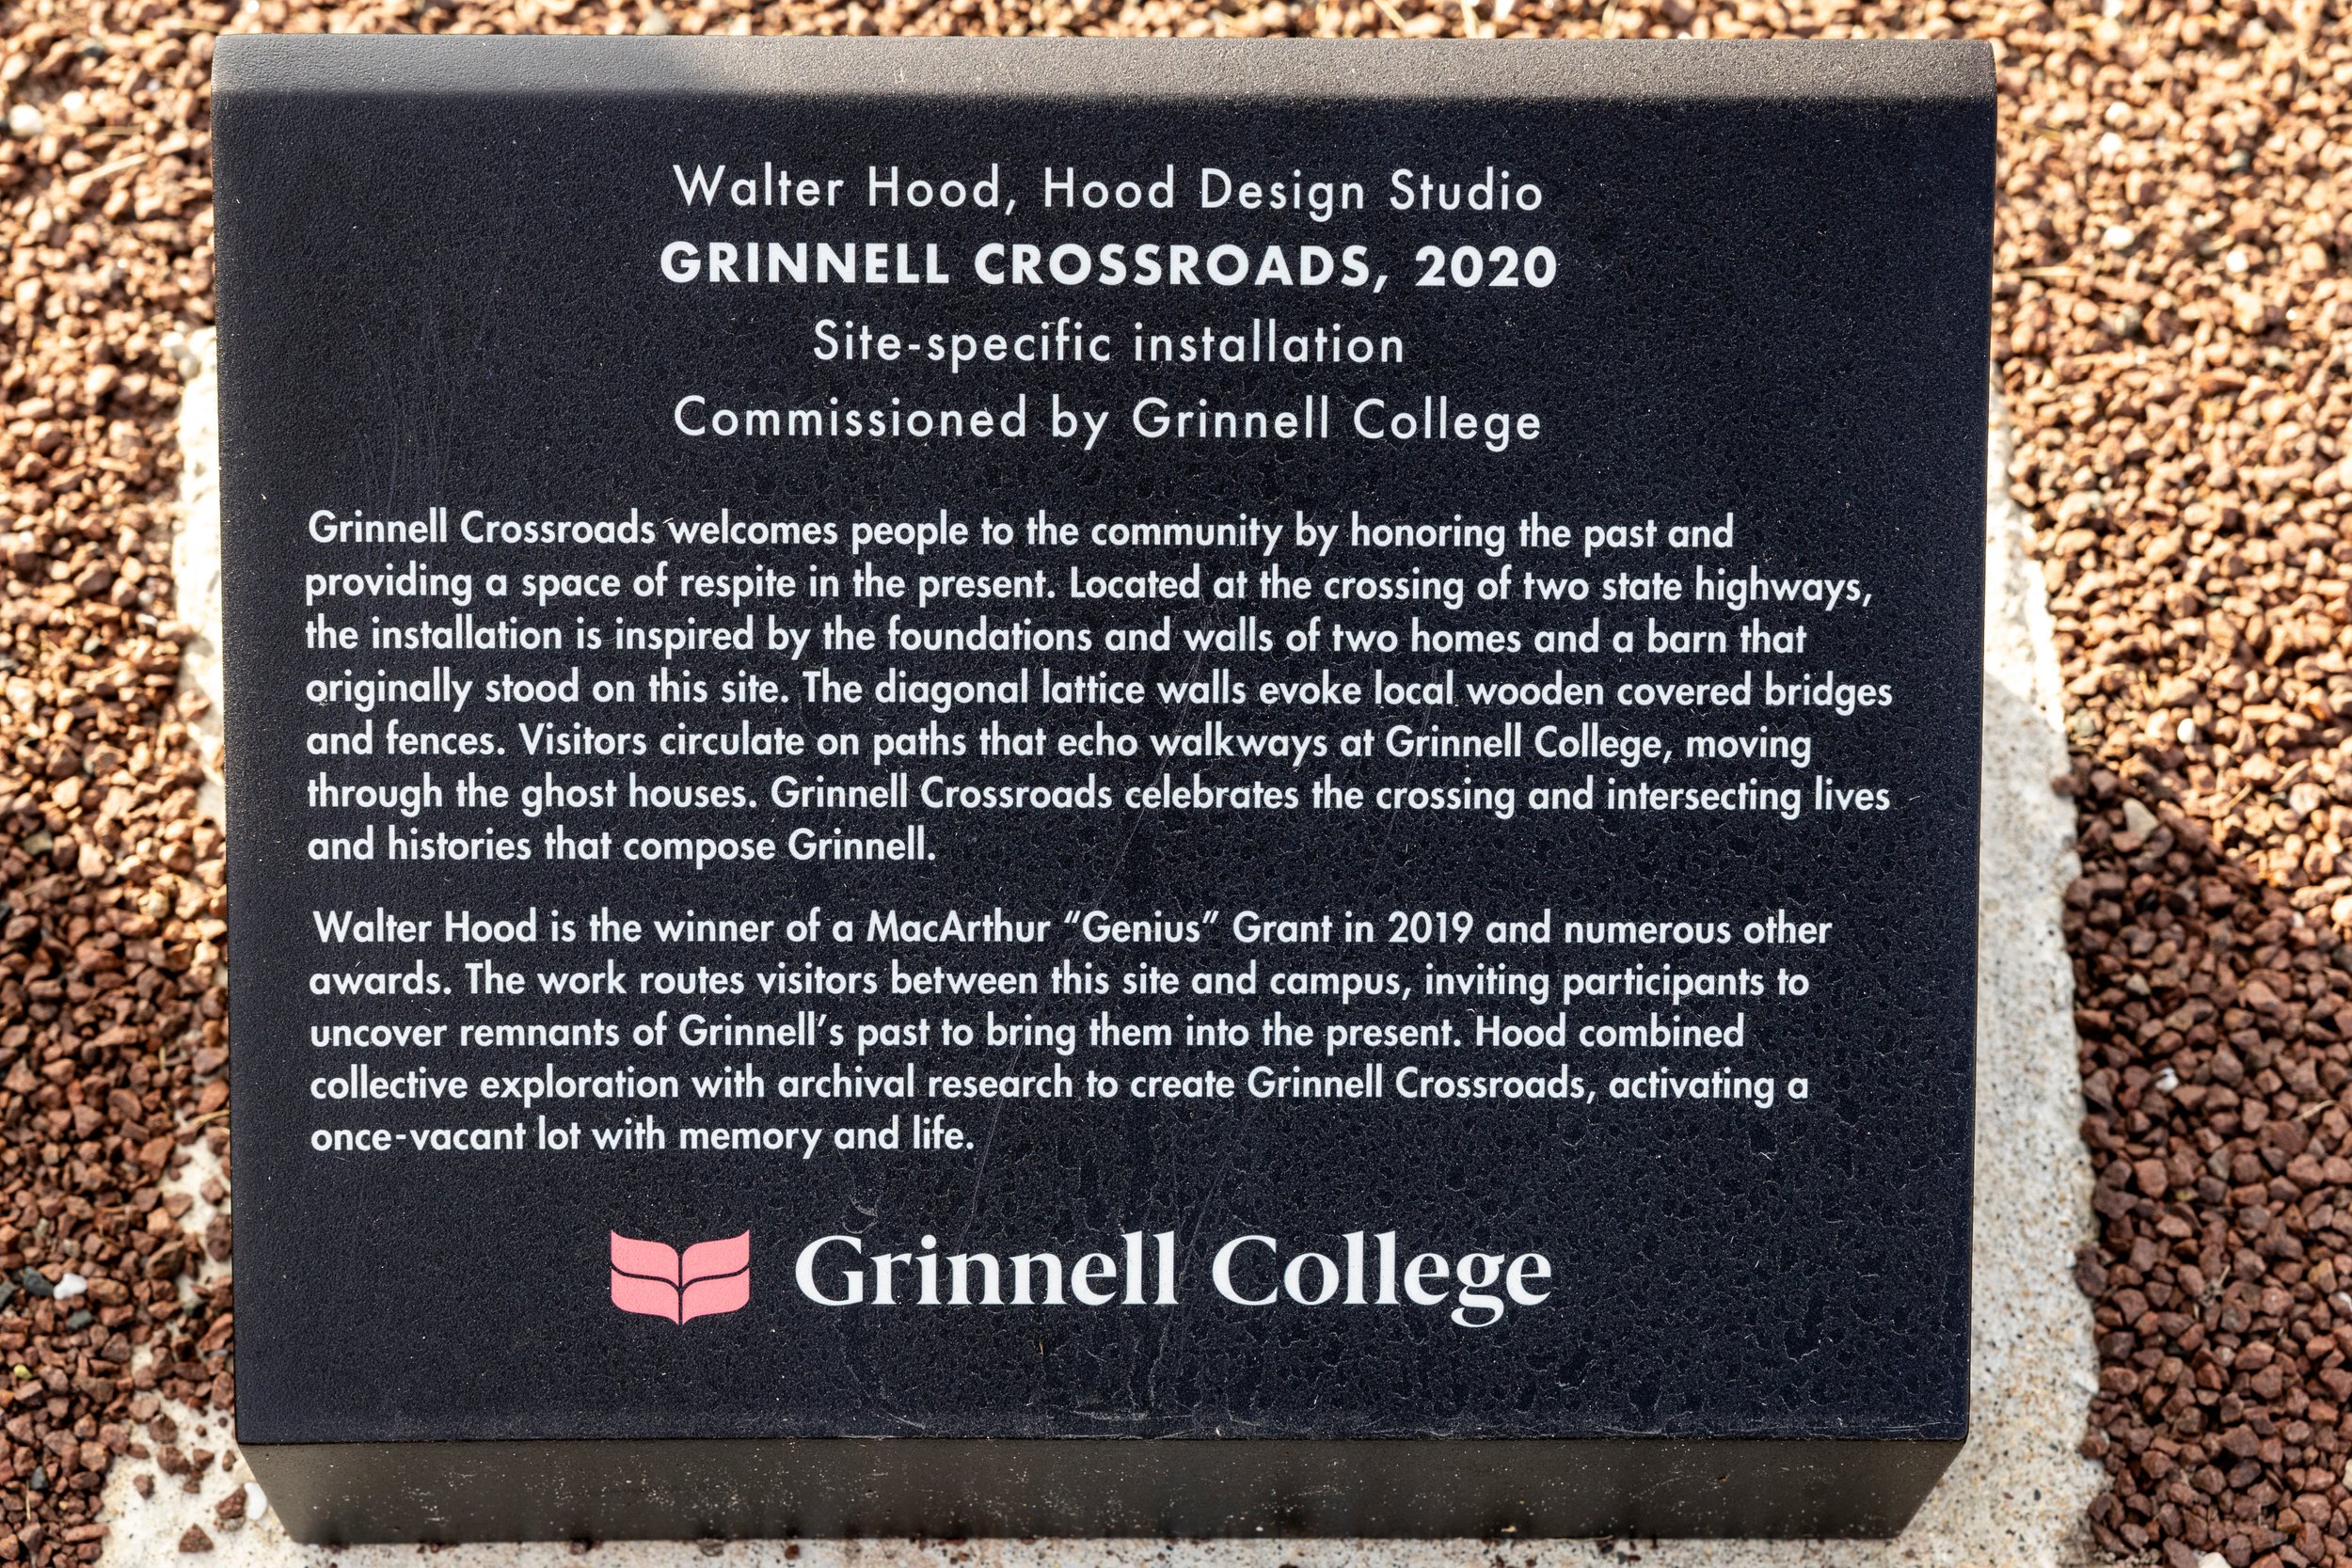  GRINNELL CROSSROADS  GRINNELL, IA  